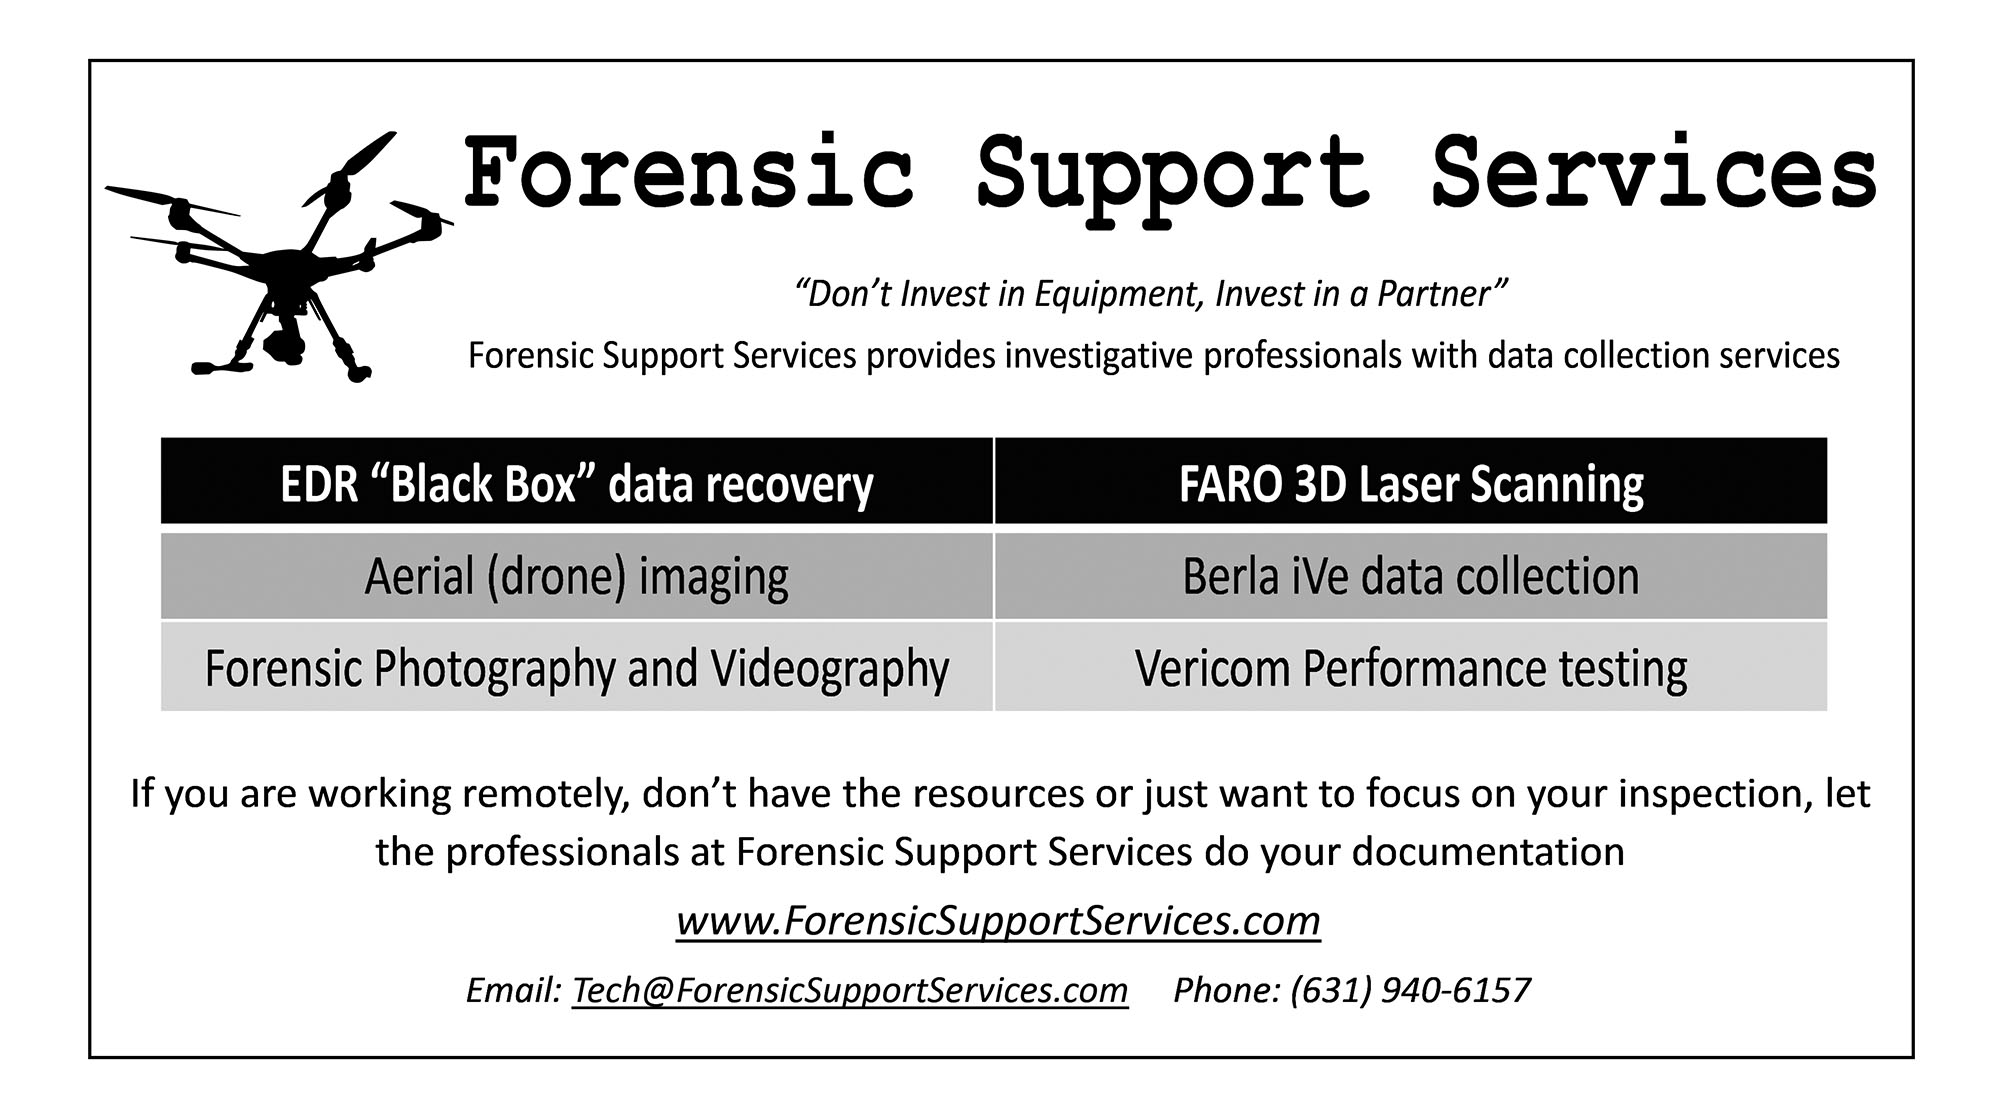 Forensic Support Services